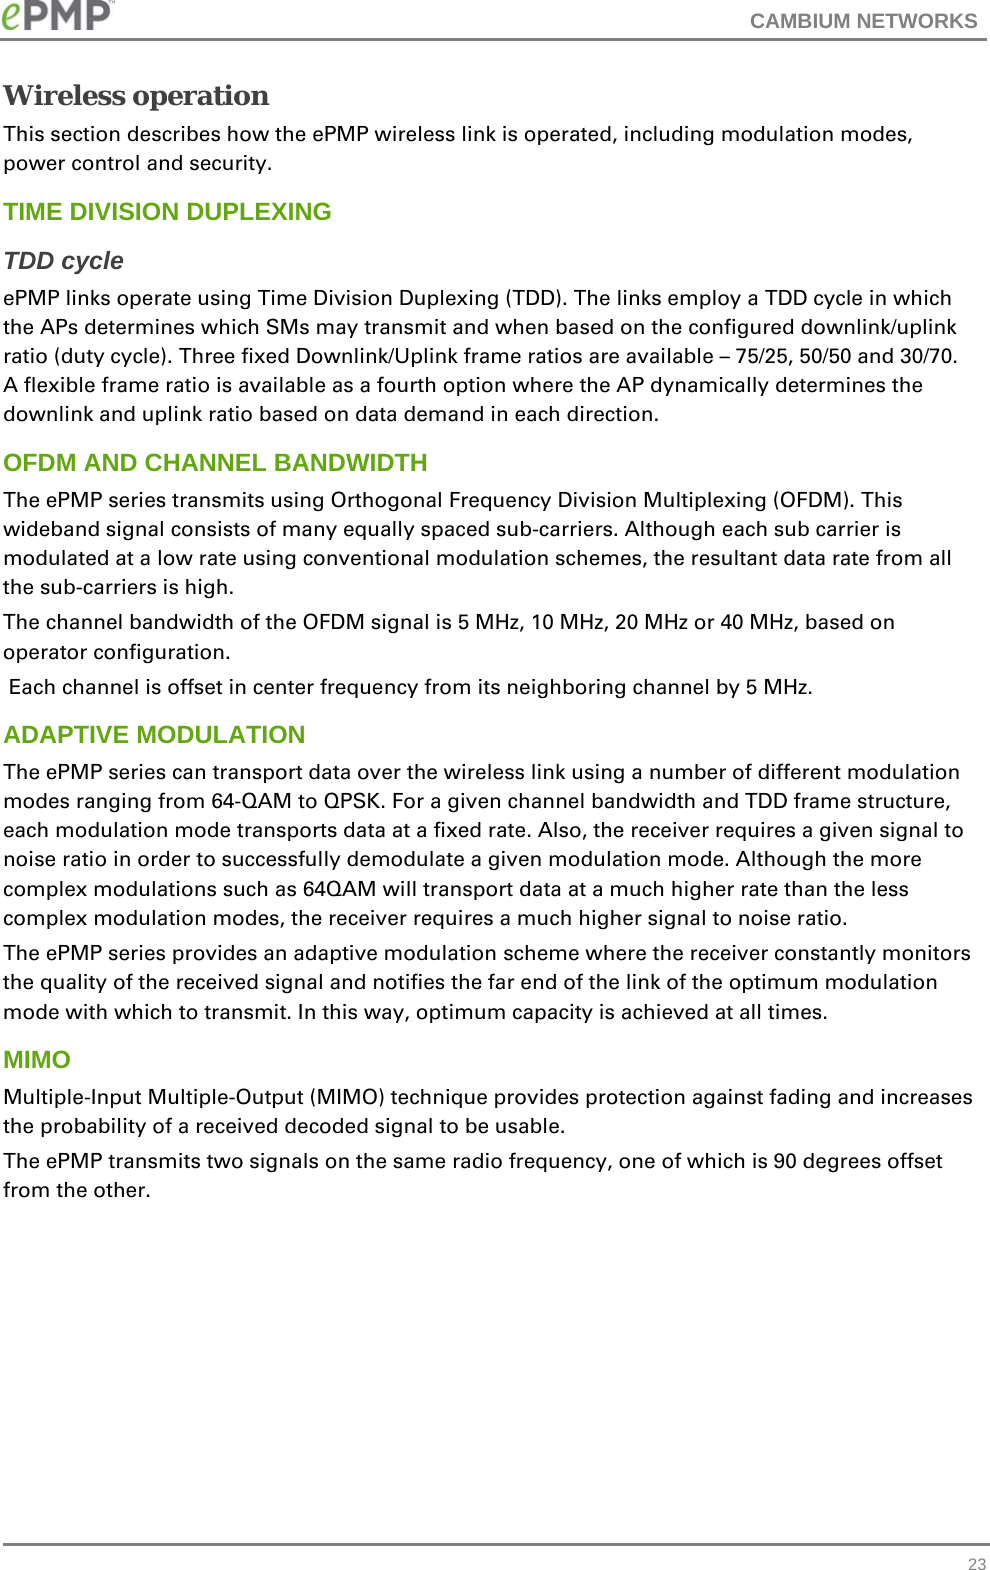 CAMBIUM NETWORKS   23Wireless operation This section describes how the ePMP wireless link is operated, including modulation modes, power control and security. TIME DIVISION DUPLEXING TDD cycle ePMP links operate using Time Division Duplexing (TDD). The links employ a TDD cycle in which the APs determines which SMs may transmit and when based on the configured downlink/uplink ratio (duty cycle). Three fixed Downlink/Uplink frame ratios are available – 75/25, 50/50 and 30/70. A flexible frame ratio is available as a fourth option where the AP dynamically determines the downlink and uplink ratio based on data demand in each direction.  OFDM AND CHANNEL BANDWIDTH The ePMP series transmits using Orthogonal Frequency Division Multiplexing (OFDM). This wideband signal consists of many equally spaced sub-carriers. Although each sub carrier is modulated at a low rate using conventional modulation schemes, the resultant data rate from all the sub-carriers is high.  The channel bandwidth of the OFDM signal is 5 MHz, 10 MHz, 20 MHz or 40 MHz, based on operator configuration.  Each channel is offset in center frequency from its neighboring channel by 5 MHz.  ADAPTIVE MODULATION The ePMP series can transport data over the wireless link using a number of different modulation modes ranging from 64-QAM to QPSK. For a given channel bandwidth and TDD frame structure, each modulation mode transports data at a fixed rate. Also, the receiver requires a given signal to noise ratio in order to successfully demodulate a given modulation mode. Although the more complex modulations such as 64QAM will transport data at a much higher rate than the less complex modulation modes, the receiver requires a much higher signal to noise ratio. The ePMP series provides an adaptive modulation scheme where the receiver constantly monitors the quality of the received signal and notifies the far end of the link of the optimum modulation mode with which to transmit. In this way, optimum capacity is achieved at all times.  MIMO Multiple-Input Multiple-Output (MIMO) technique provides protection against fading and increases the probability of a received decoded signal to be usable.  The ePMP transmits two signals on the same radio frequency, one of which is 90 degrees offset from the other.  